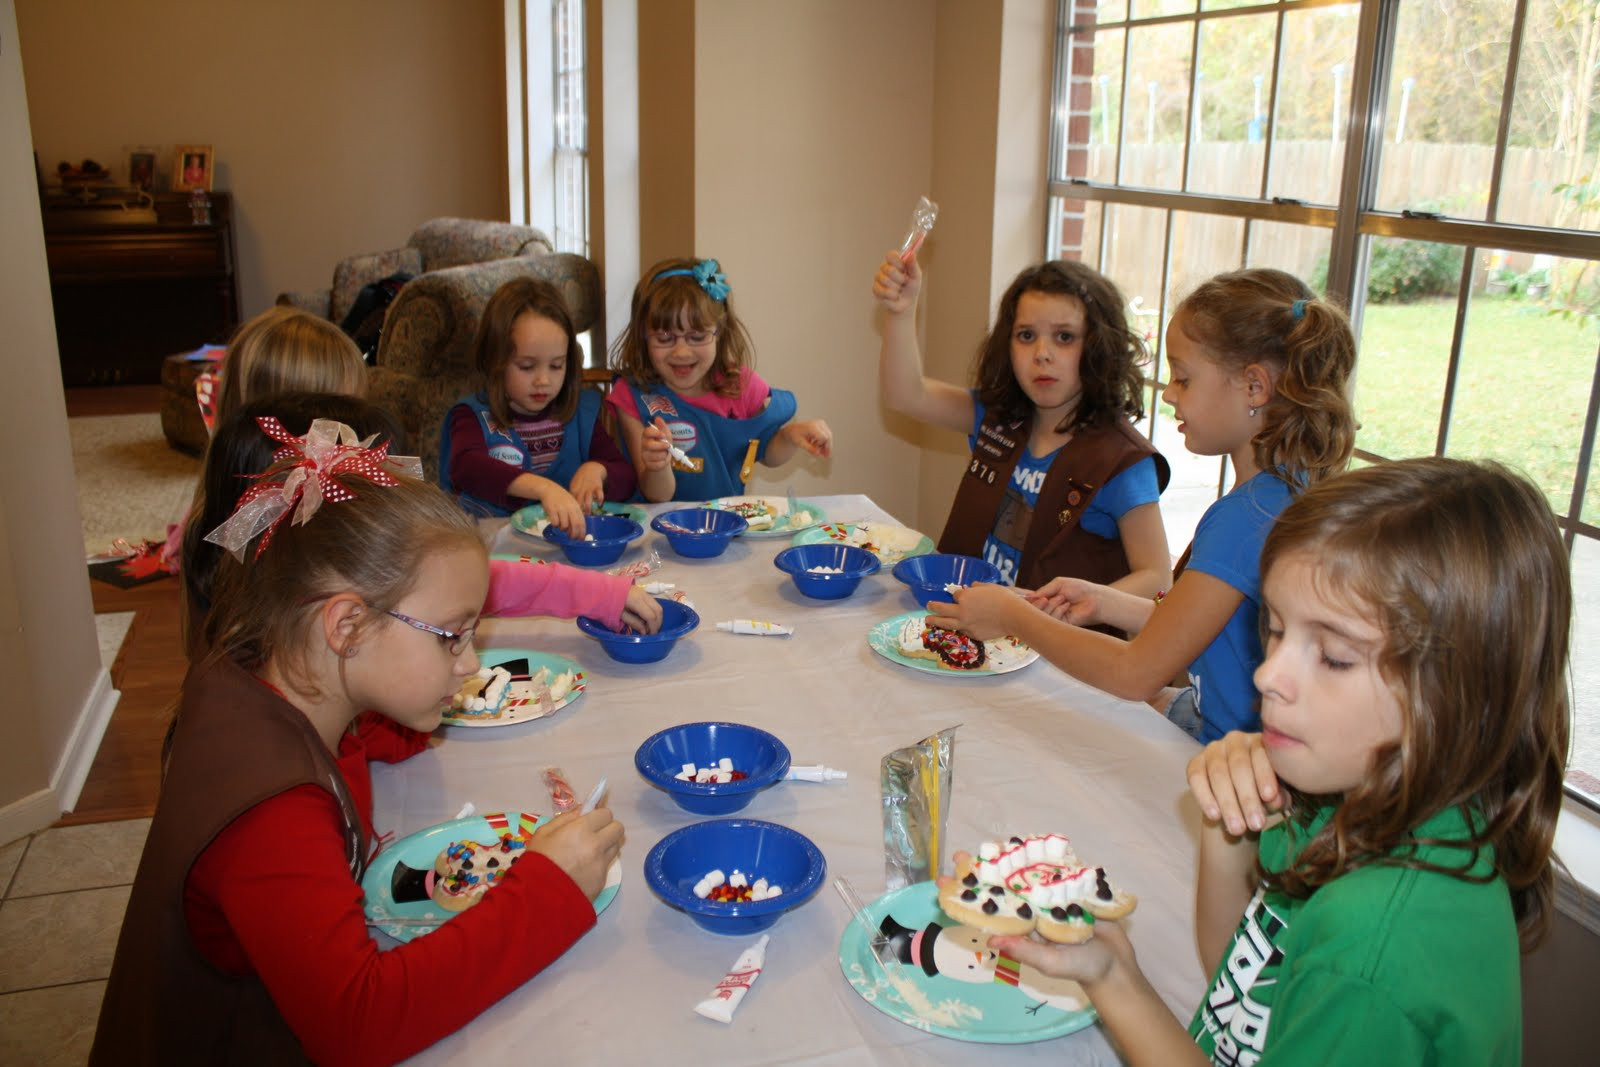 Girl Scout Christmas Party Ideas
 The Theut Family Girl Scout Christmas Party